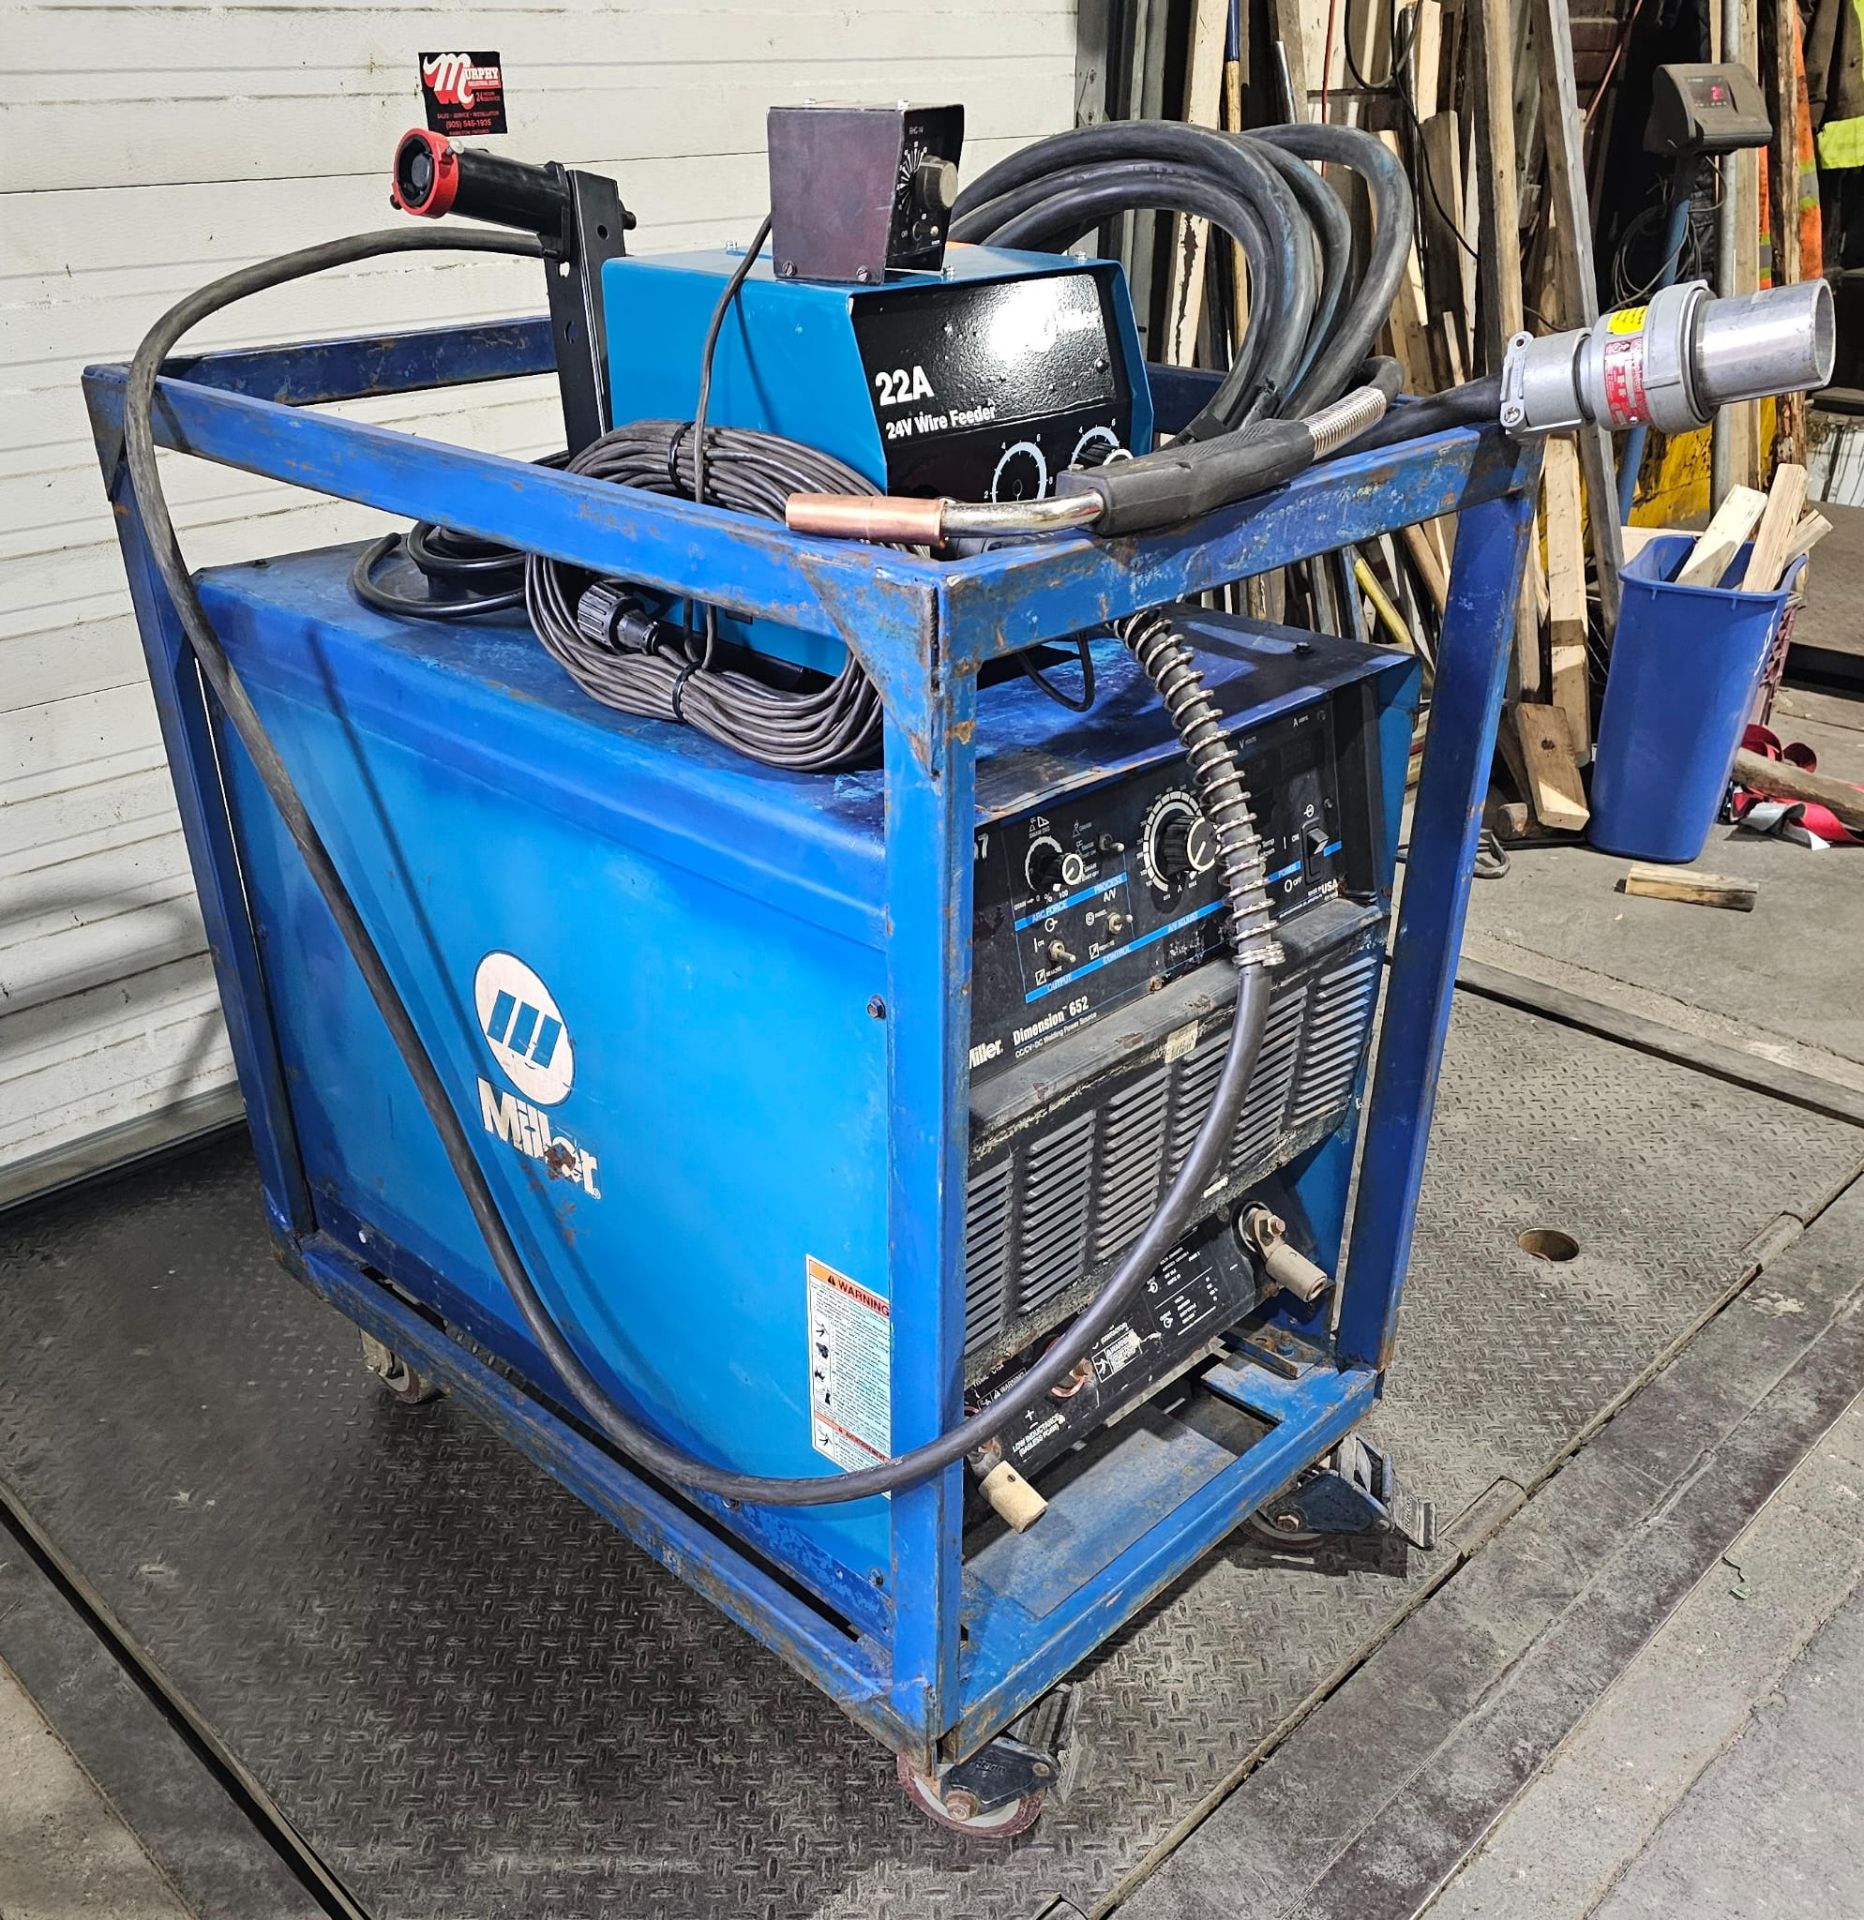 Miller Dimension 652 Mig Welder 650 Amp Mig Tig Stick Multi Process Power Source with 22A Wire - Image 6 of 10